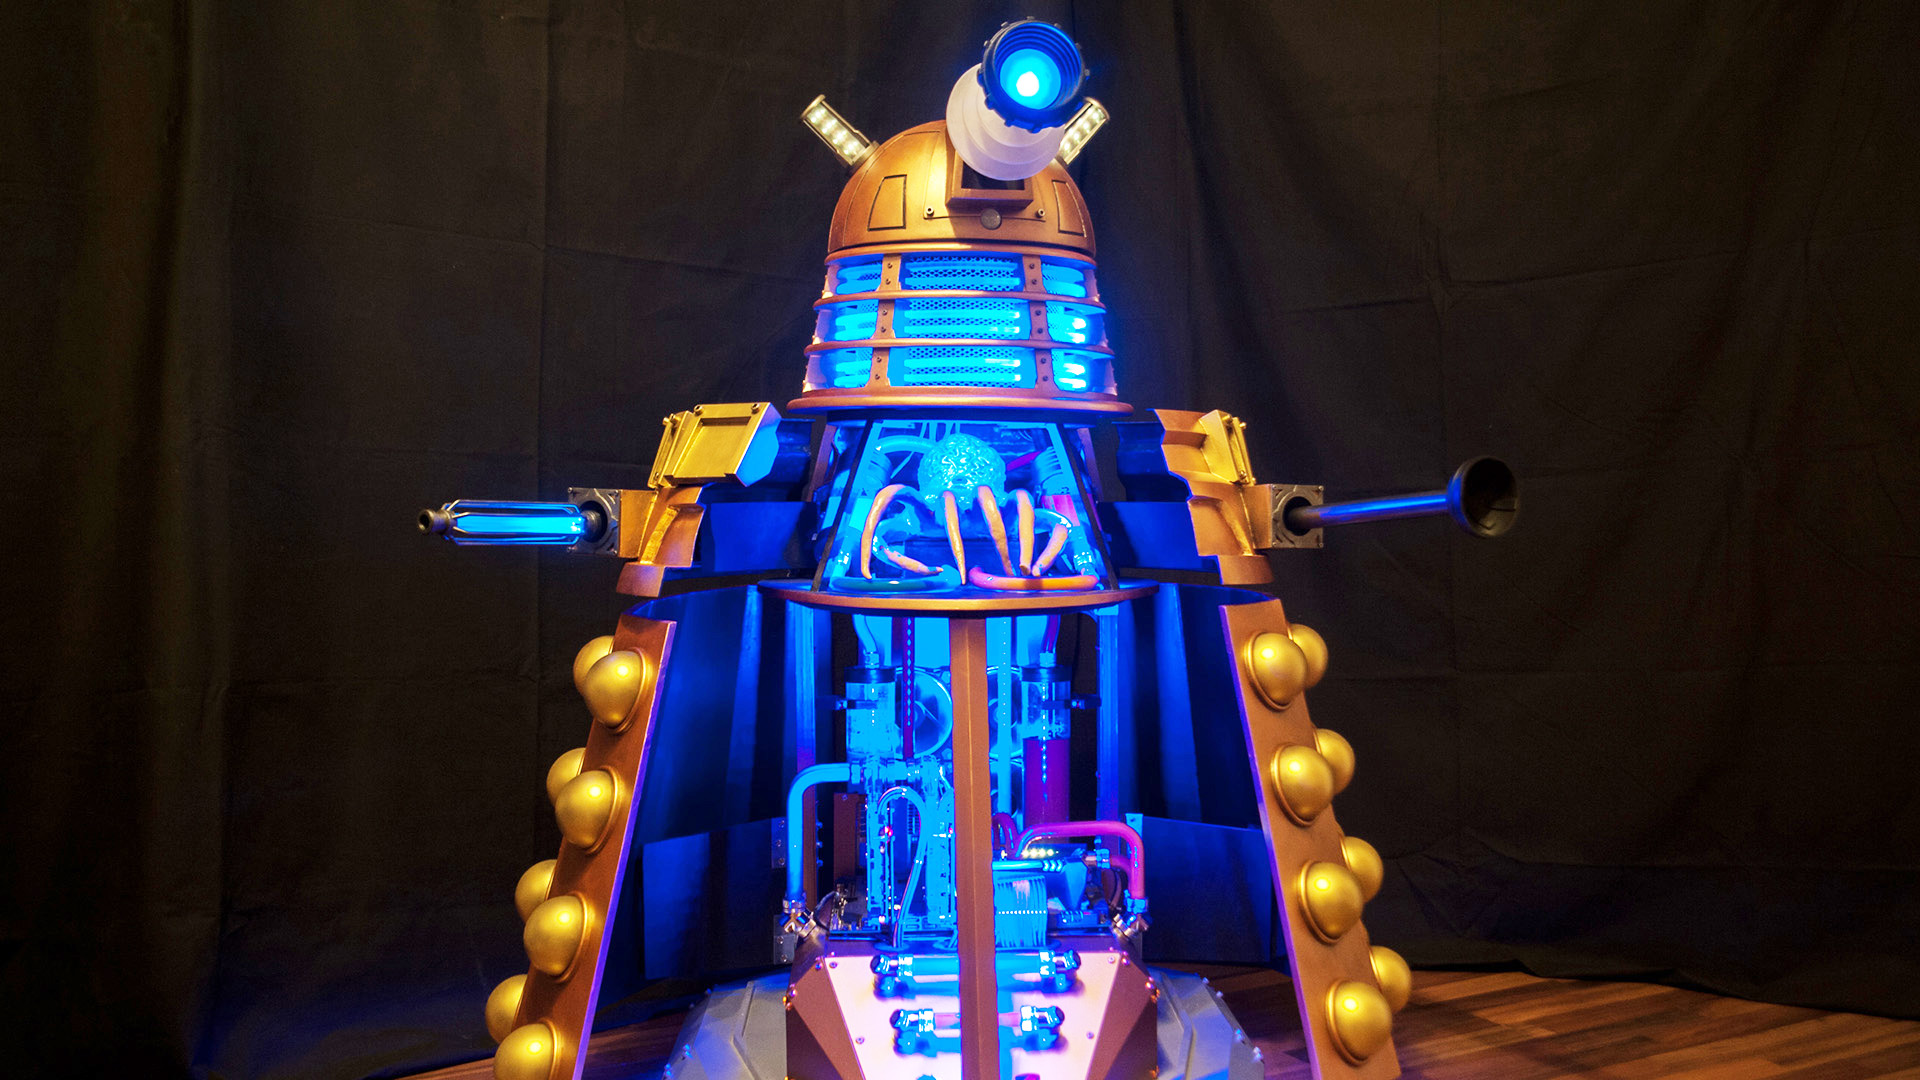 This Dalek gaming PC looks like a real Dr Who prop